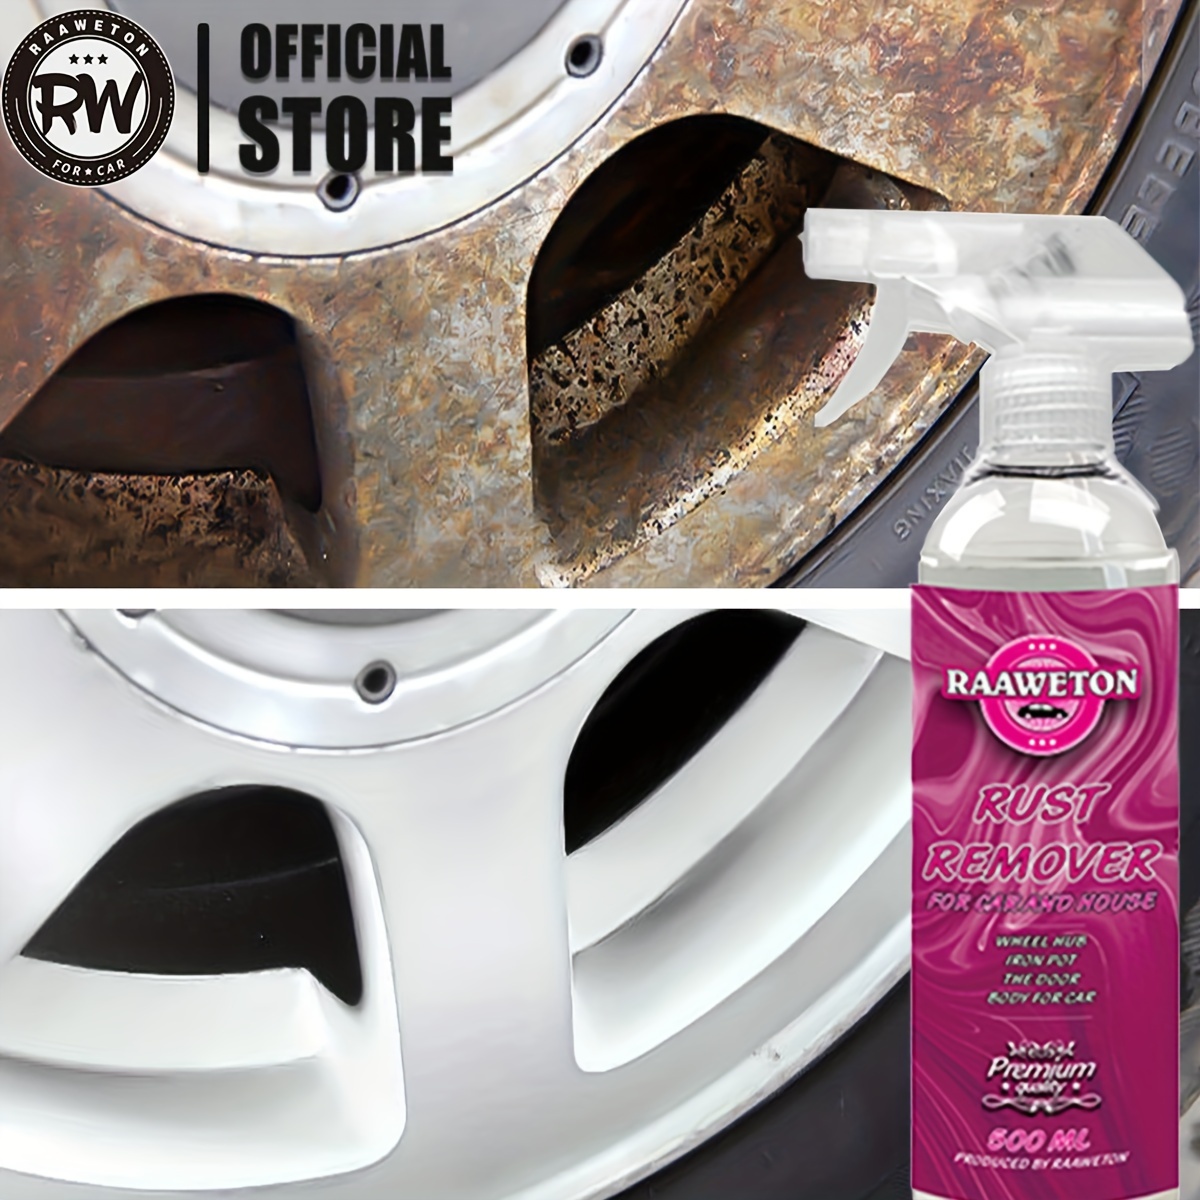 

16oz Iron Remover Spray - Effective Rust And Iron Particle Eliminator For Car Detailing | Perfect For Car Paint, Motorcycles, Rvs, And Boats | Pre-clay Bar, Wax, And Wash Treatment